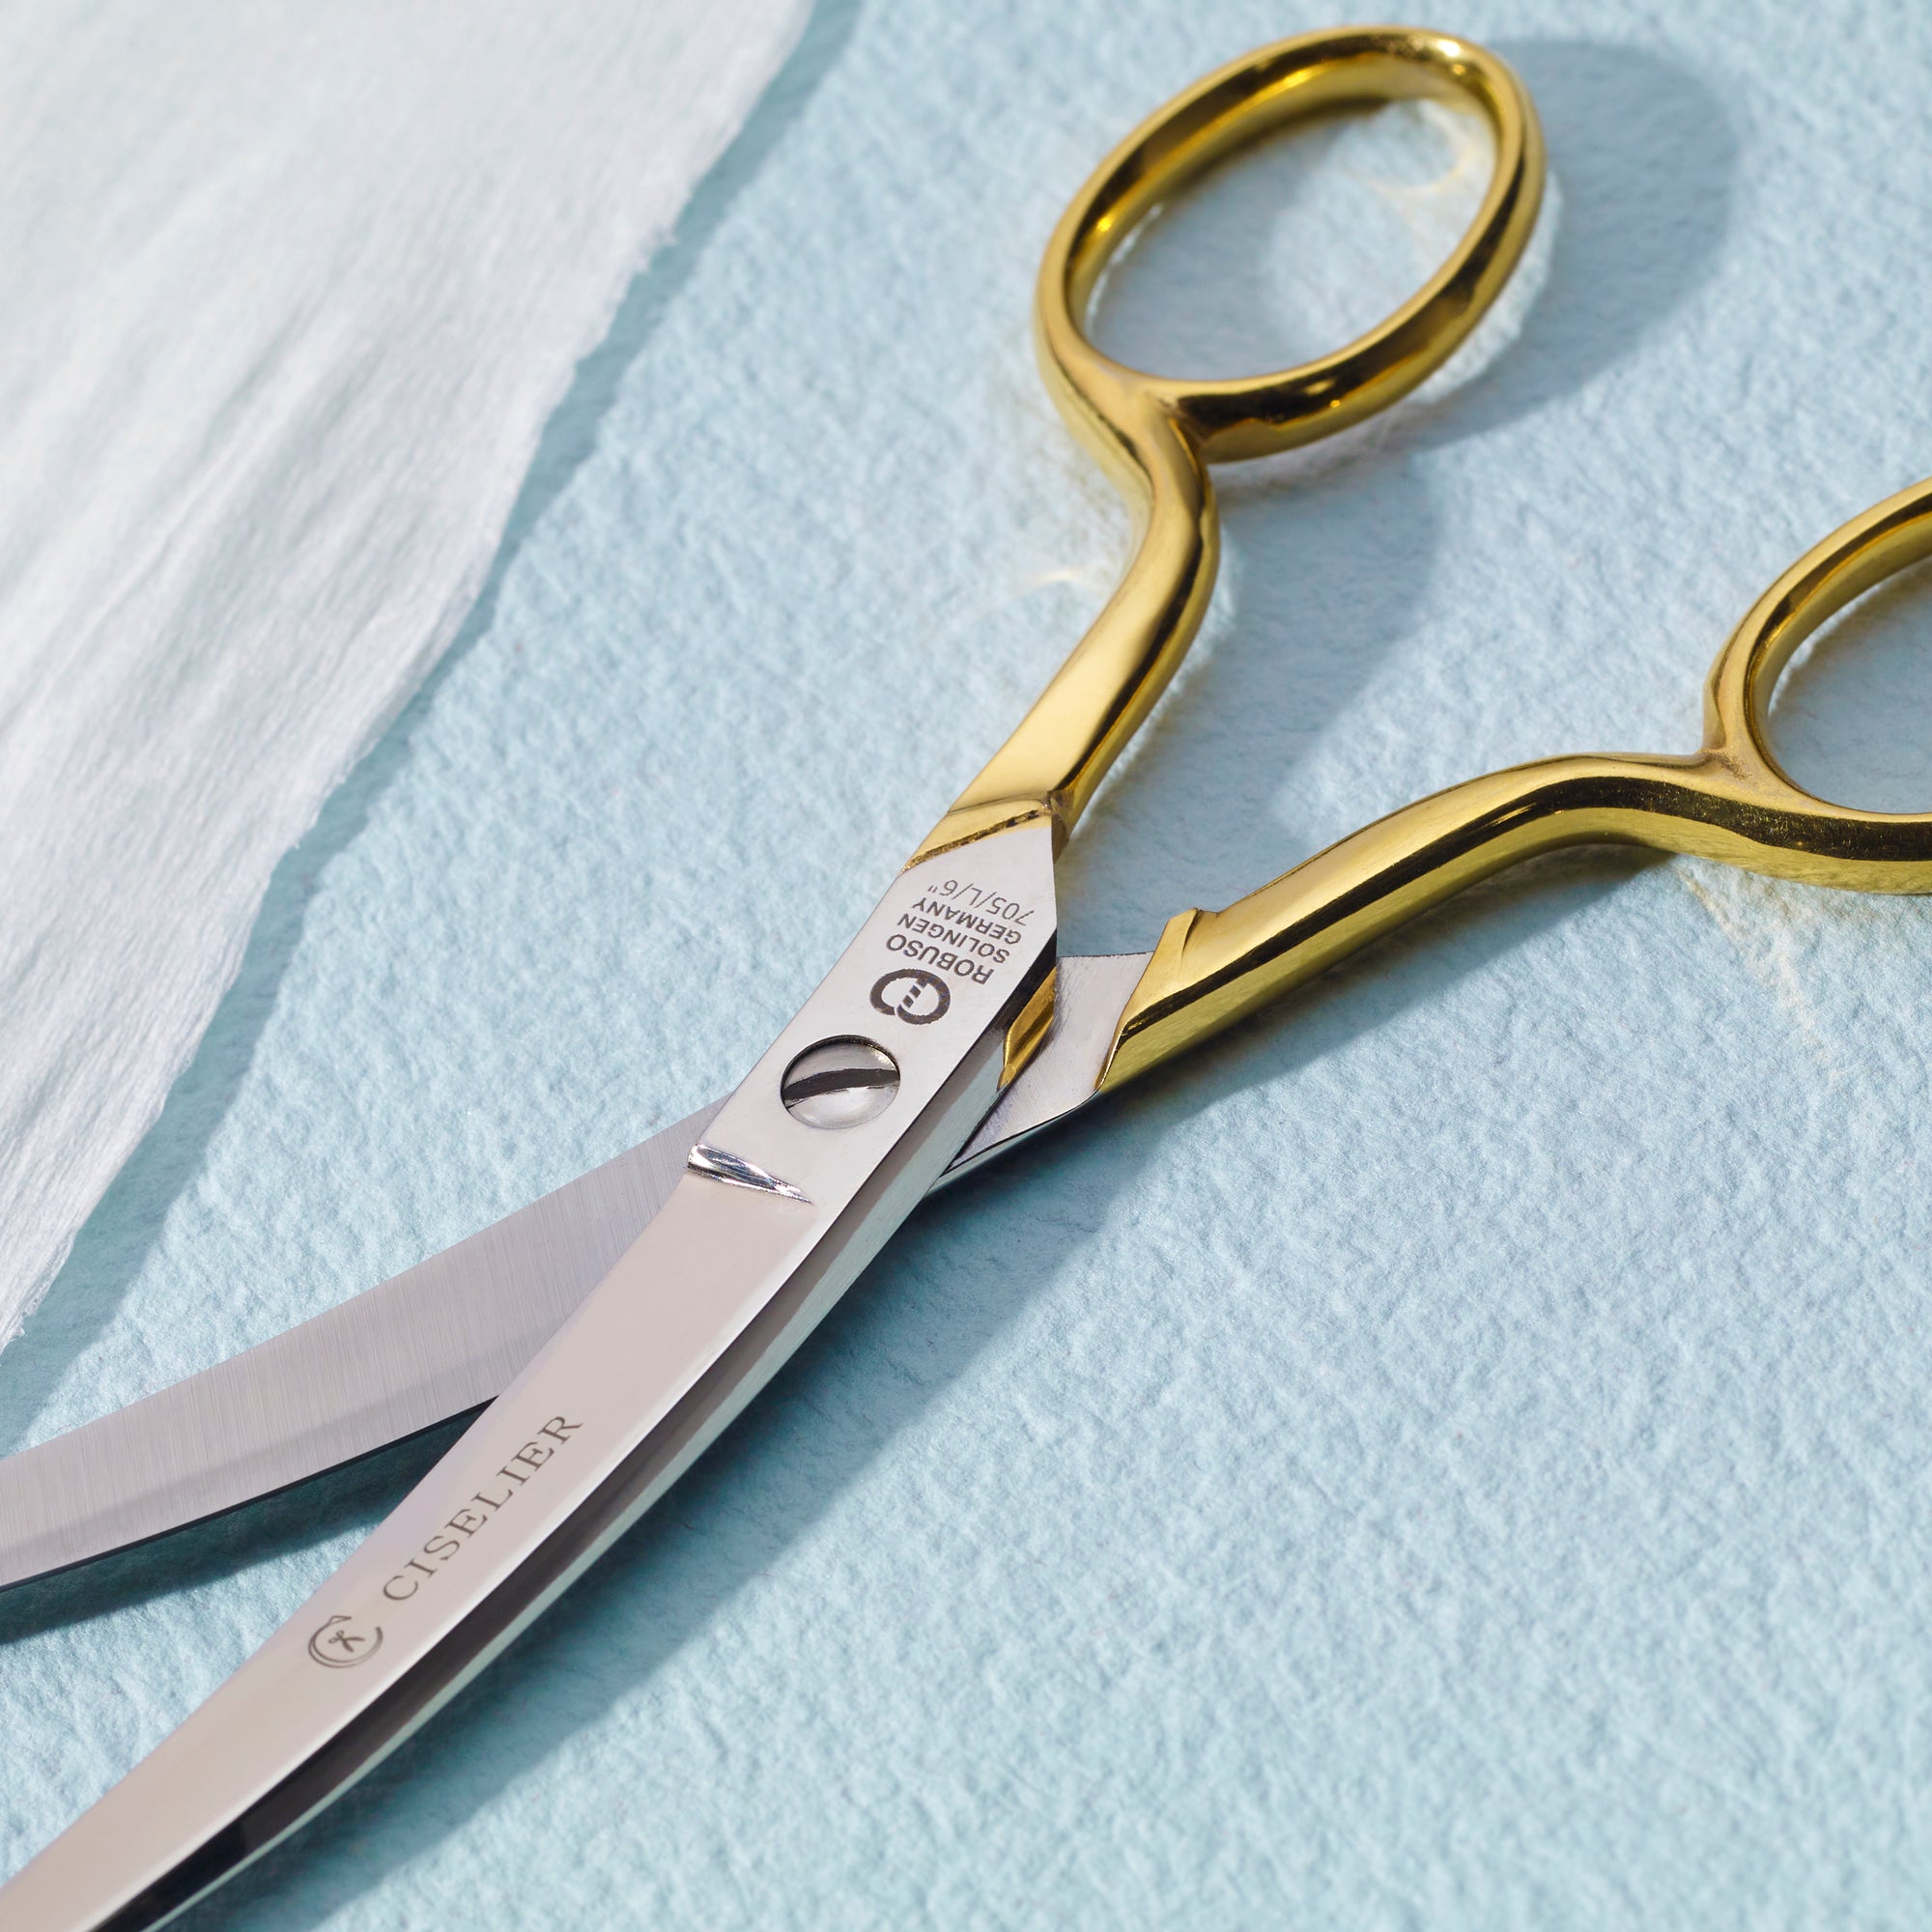 Plastic-Handled Pinking Shears in Three Styles